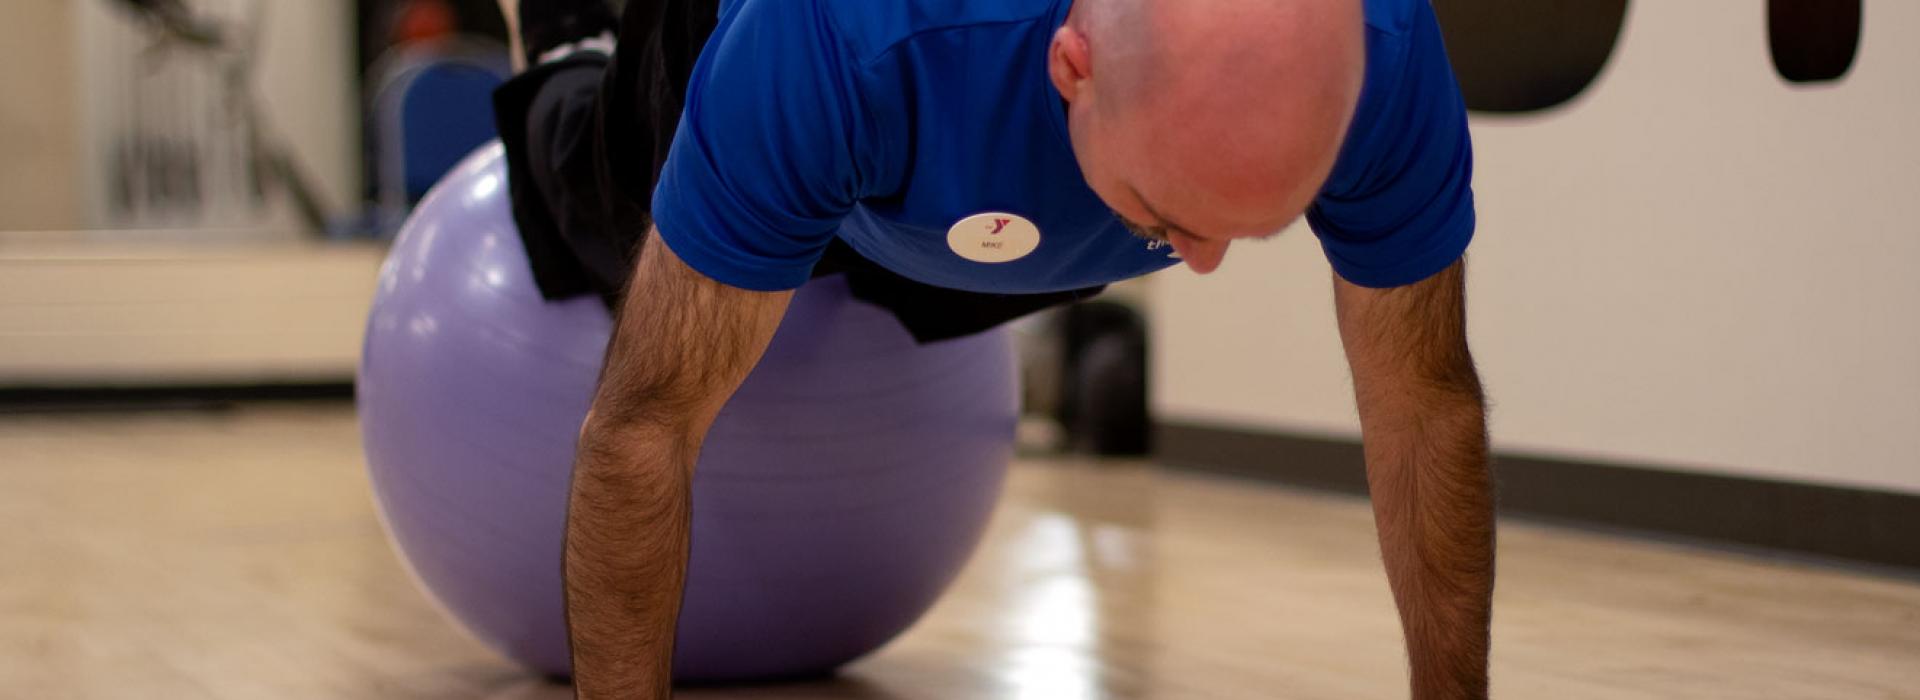 Mike LoBiondo, a personal trainer at the Kennett Area YMCA, demonstrates exercises using a balance ball.